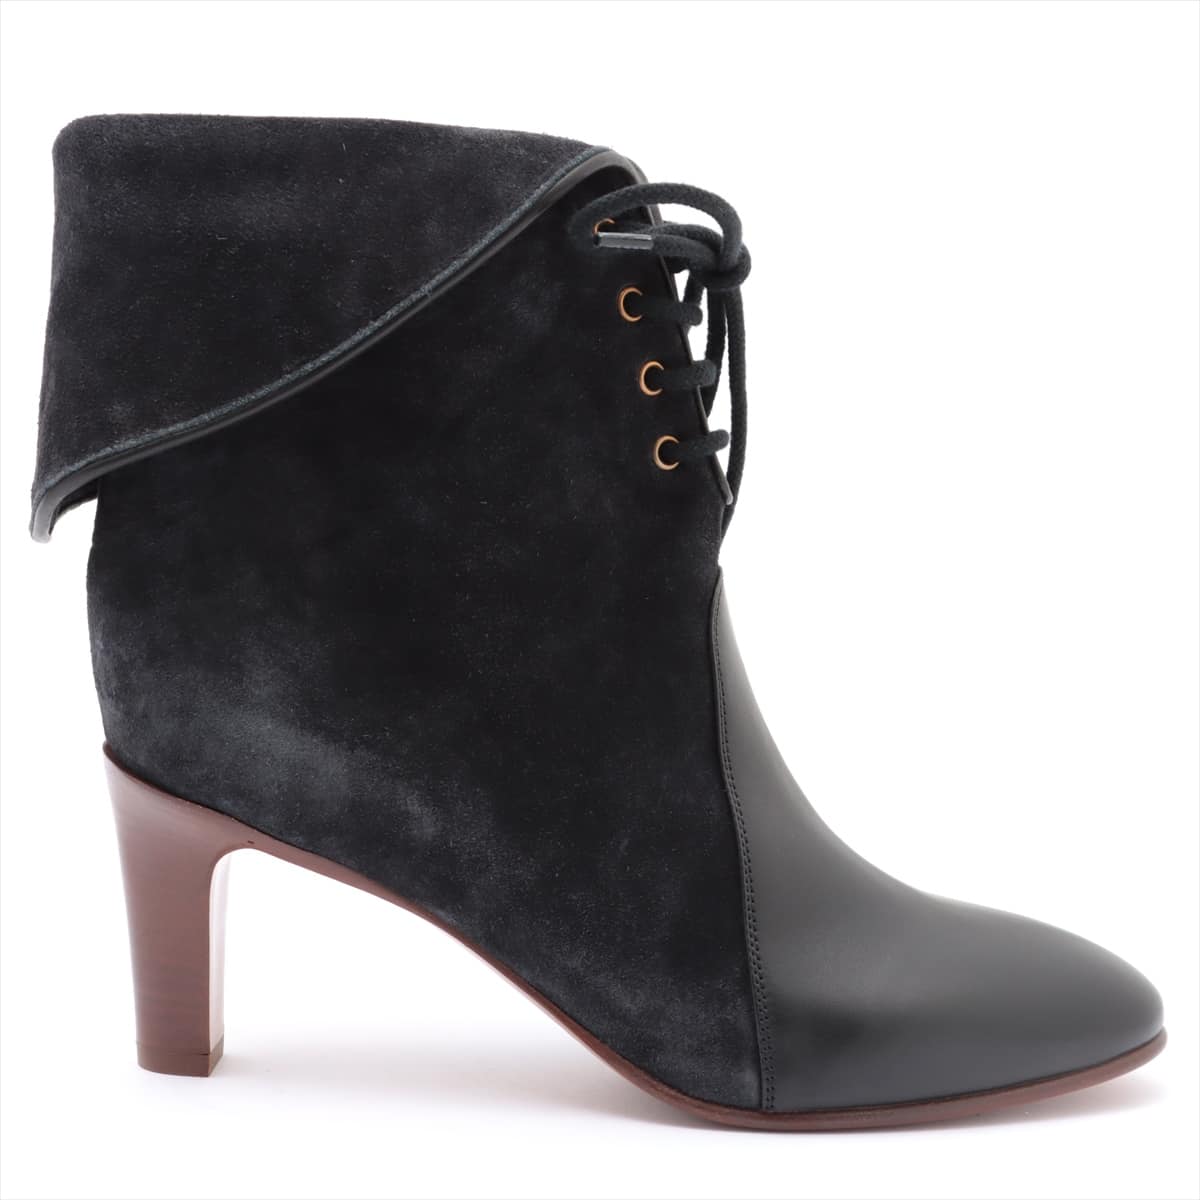 Chloe Leather & suede Boots 36 Ladies' Black x Gray